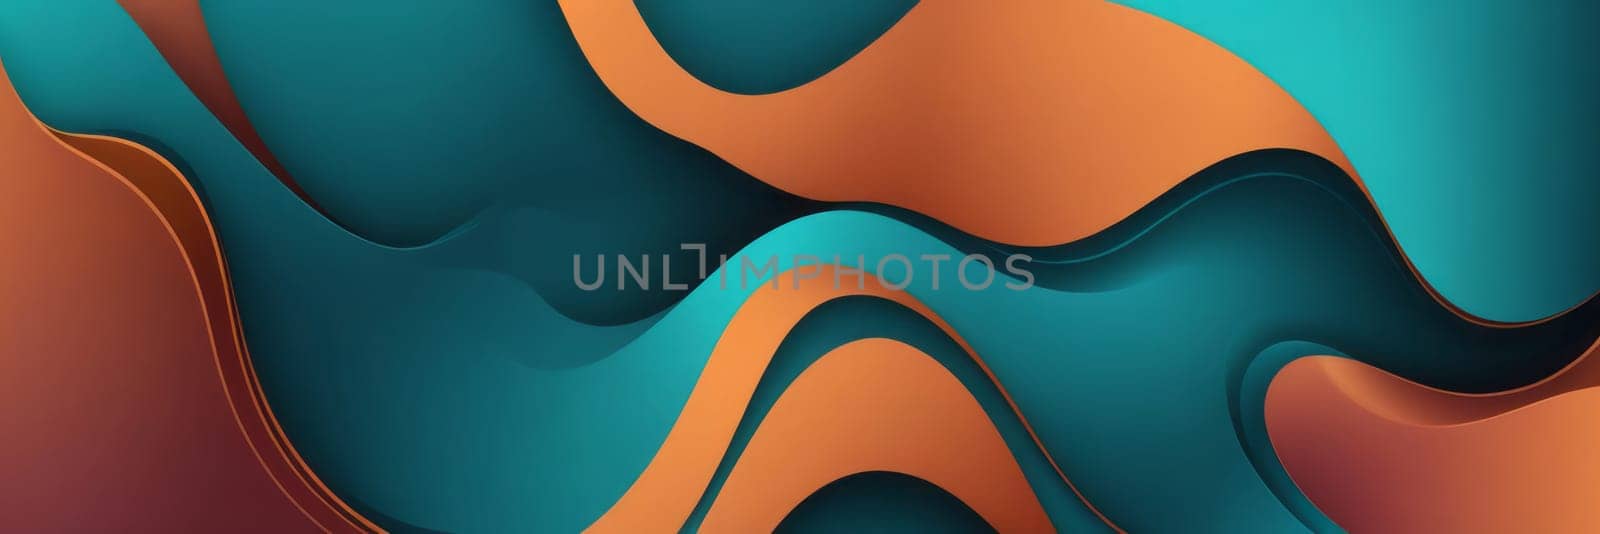 Teal Distorted Shapes Gradient Wallpaper by nkotlyar